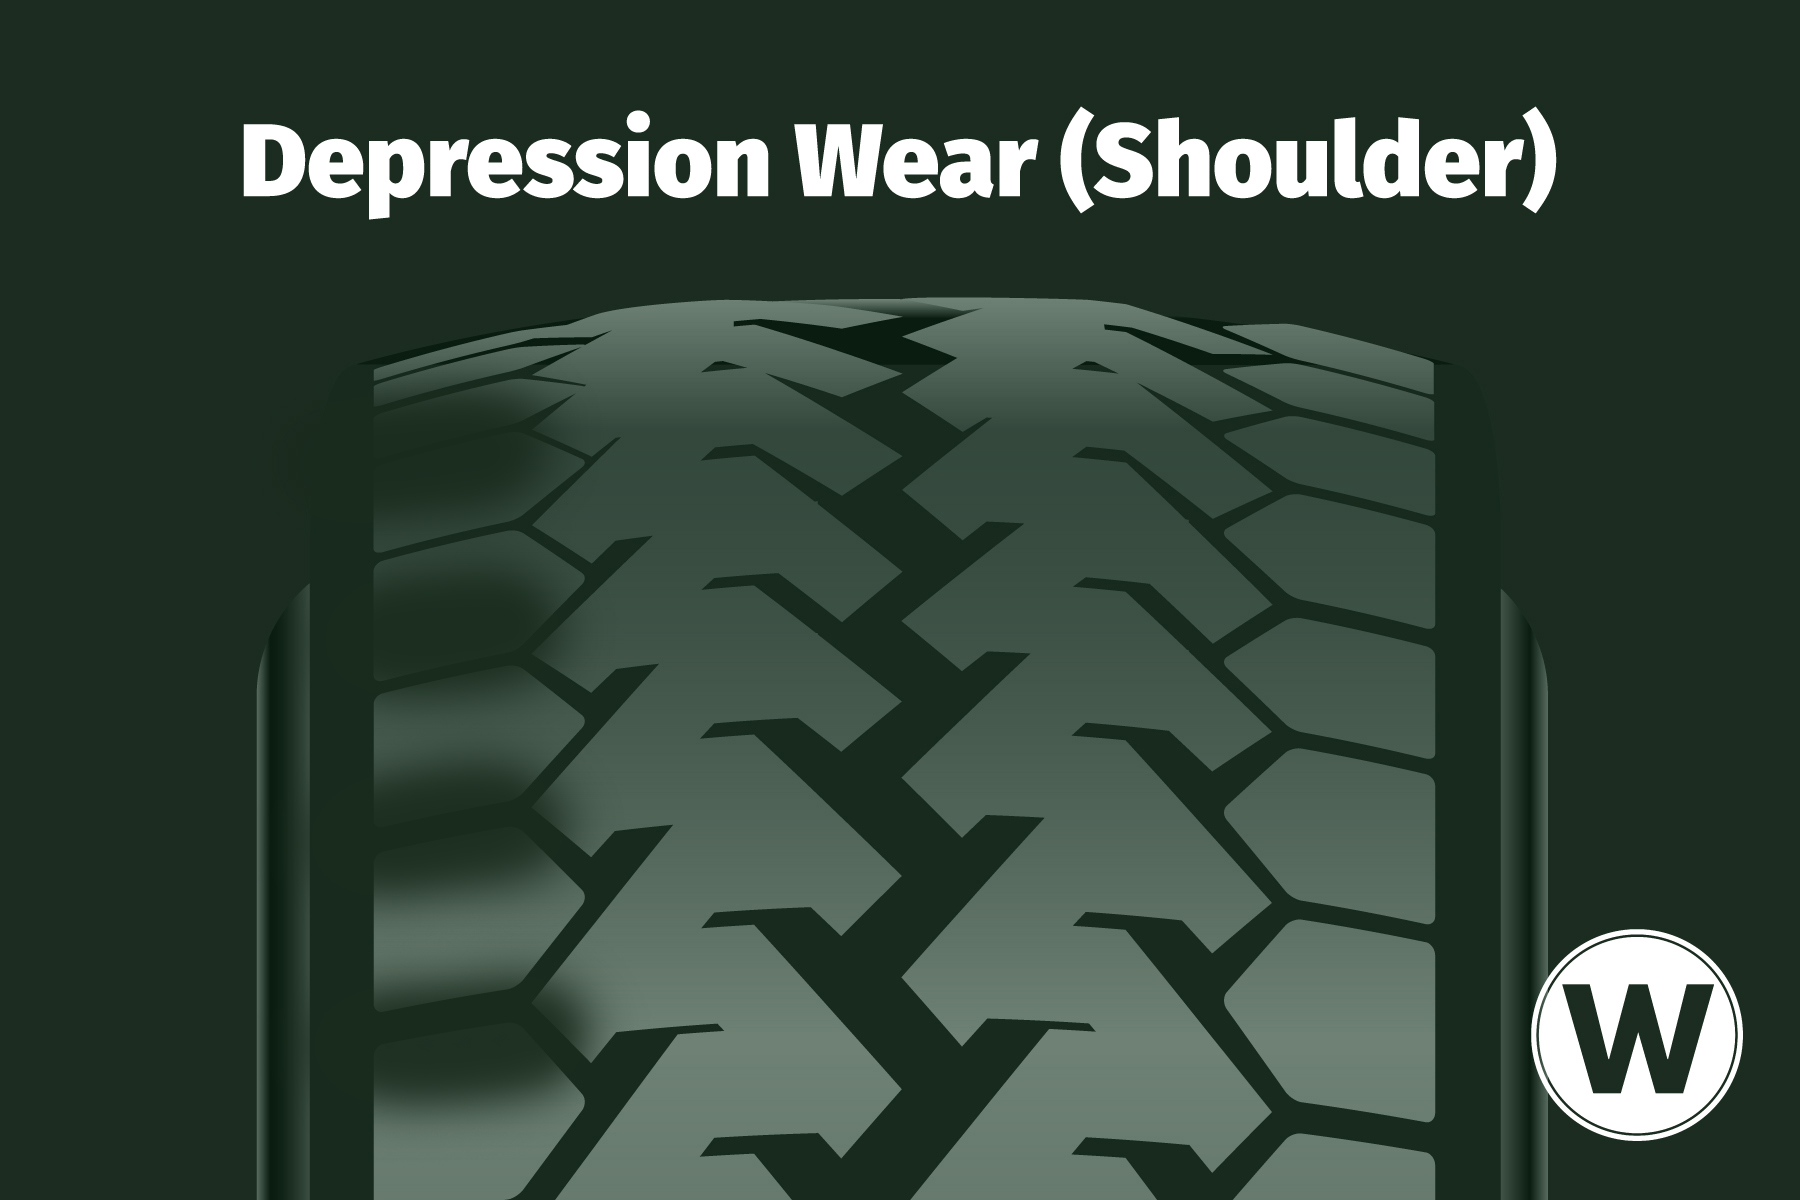 A wear pattern diagram that shows where to find depression wear (shoulder) on your commercial steer tires.